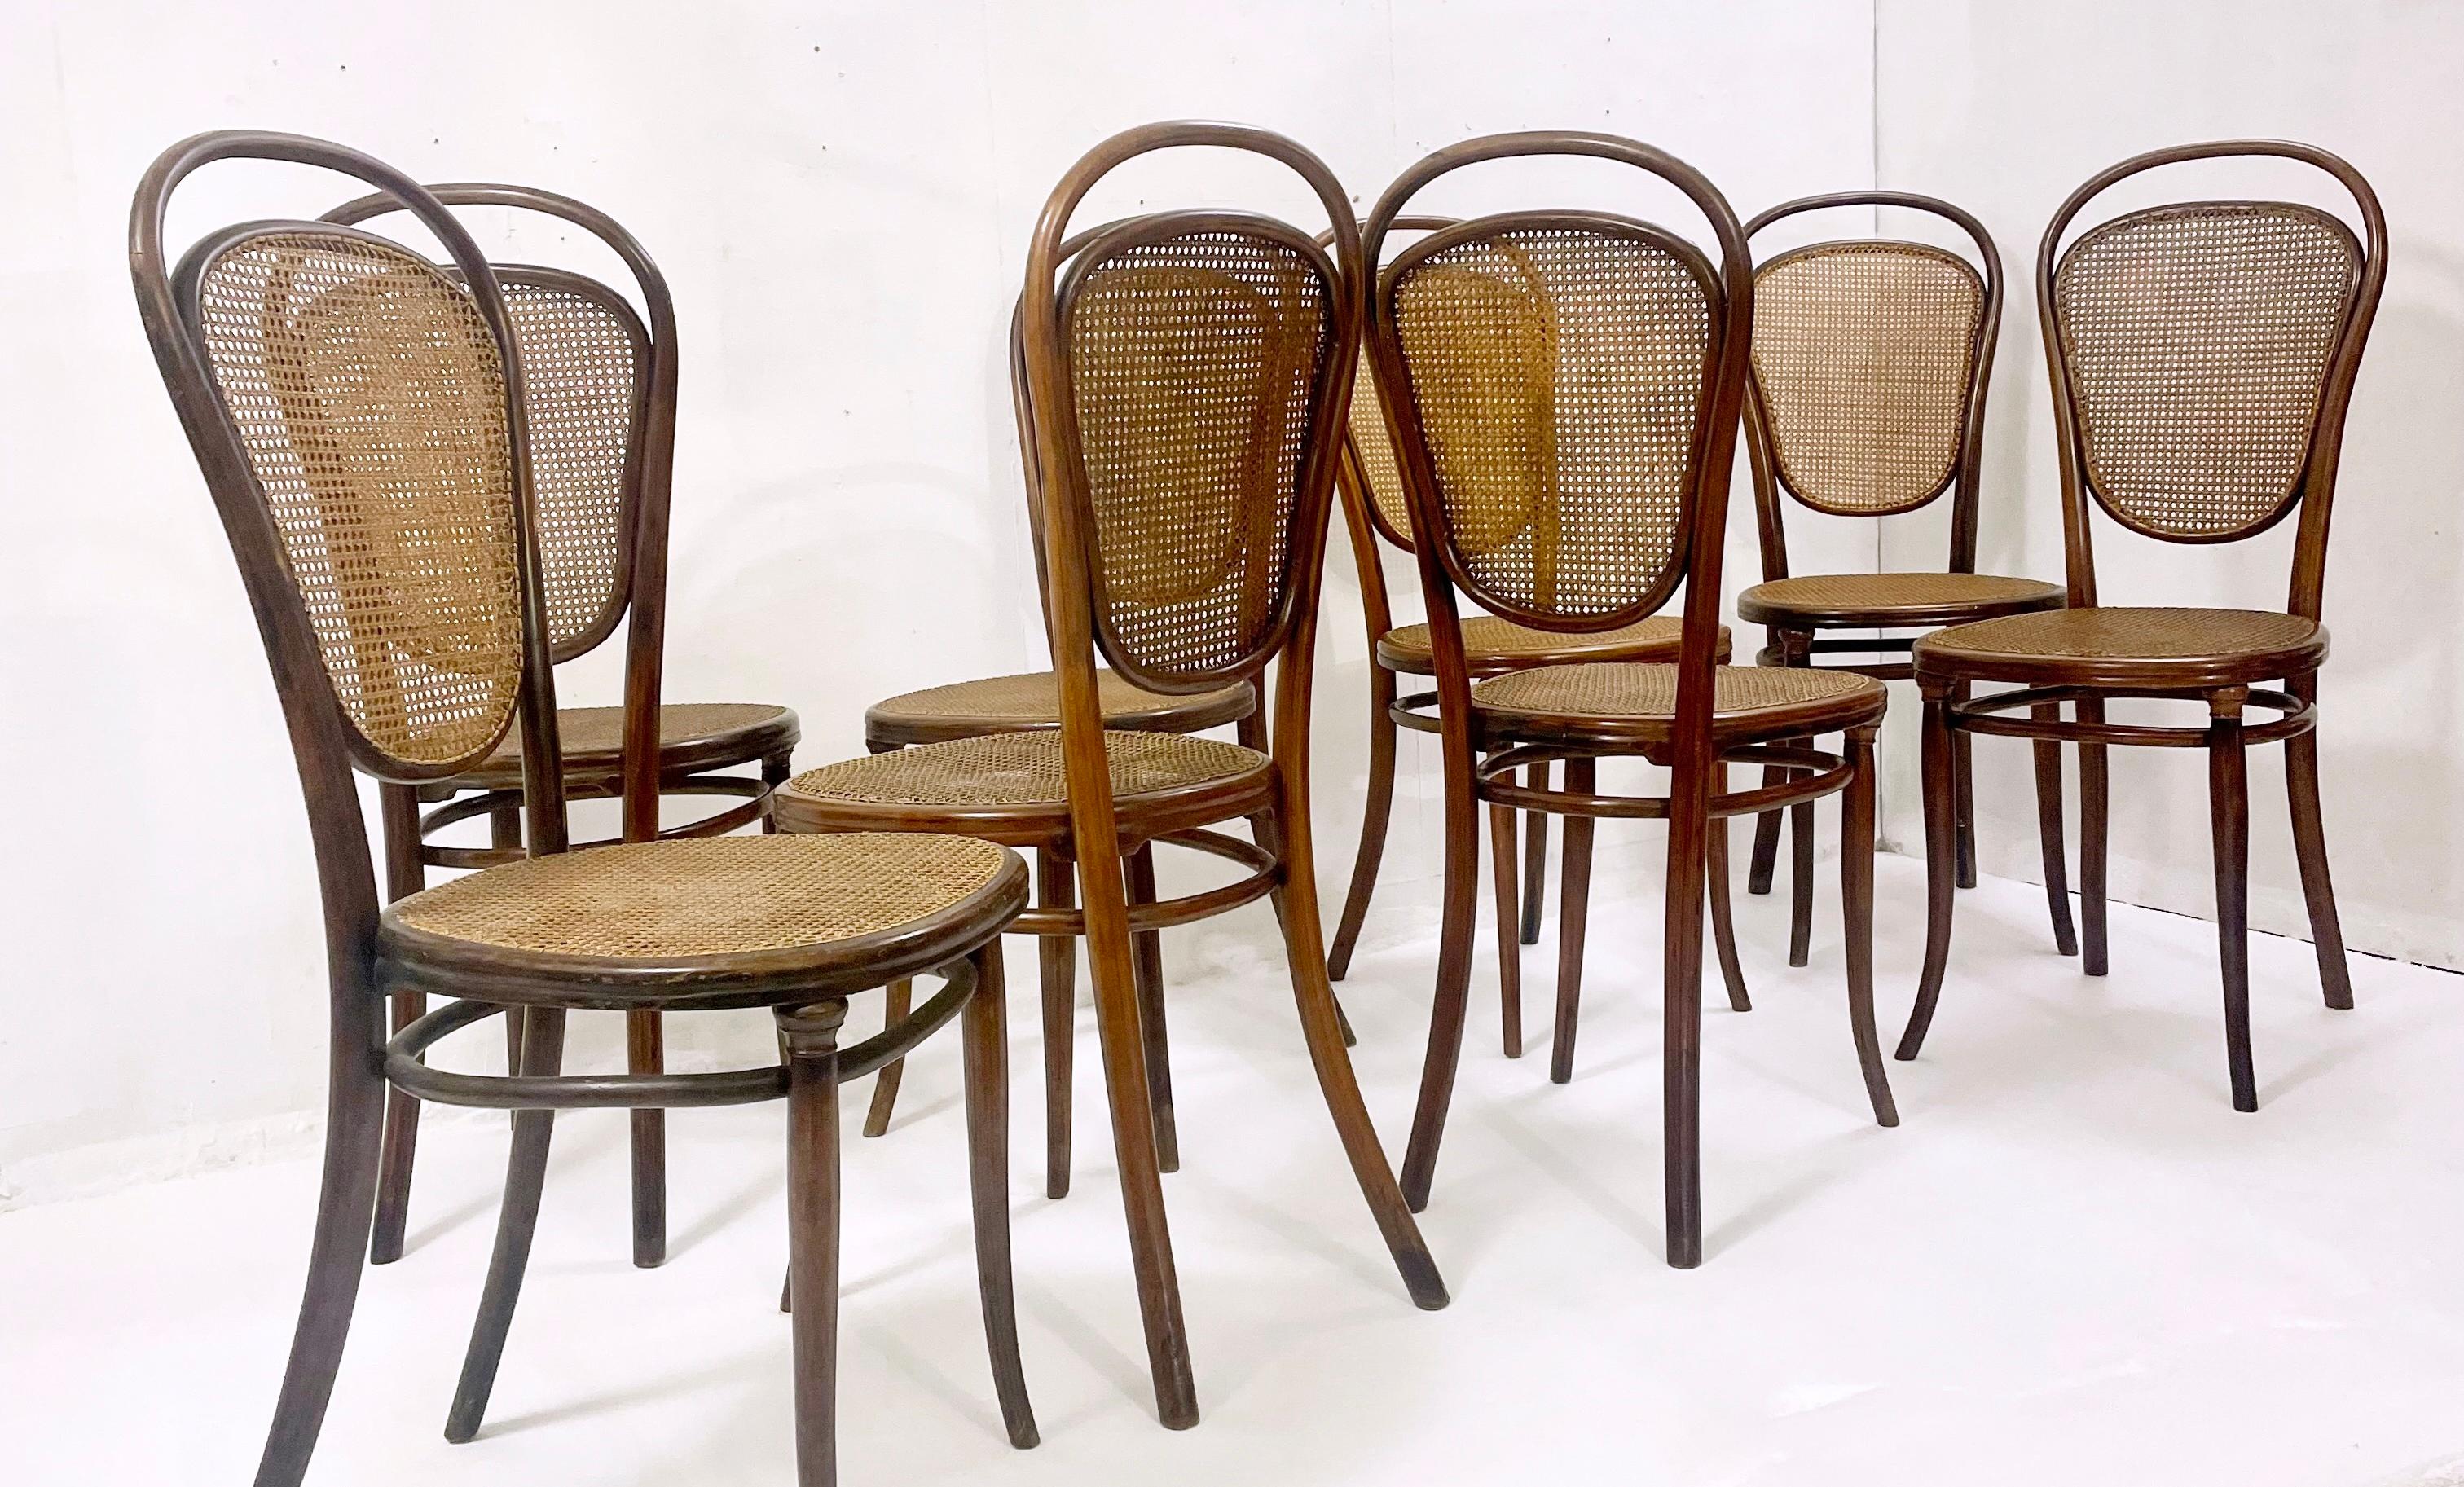 thonet bentwood chair